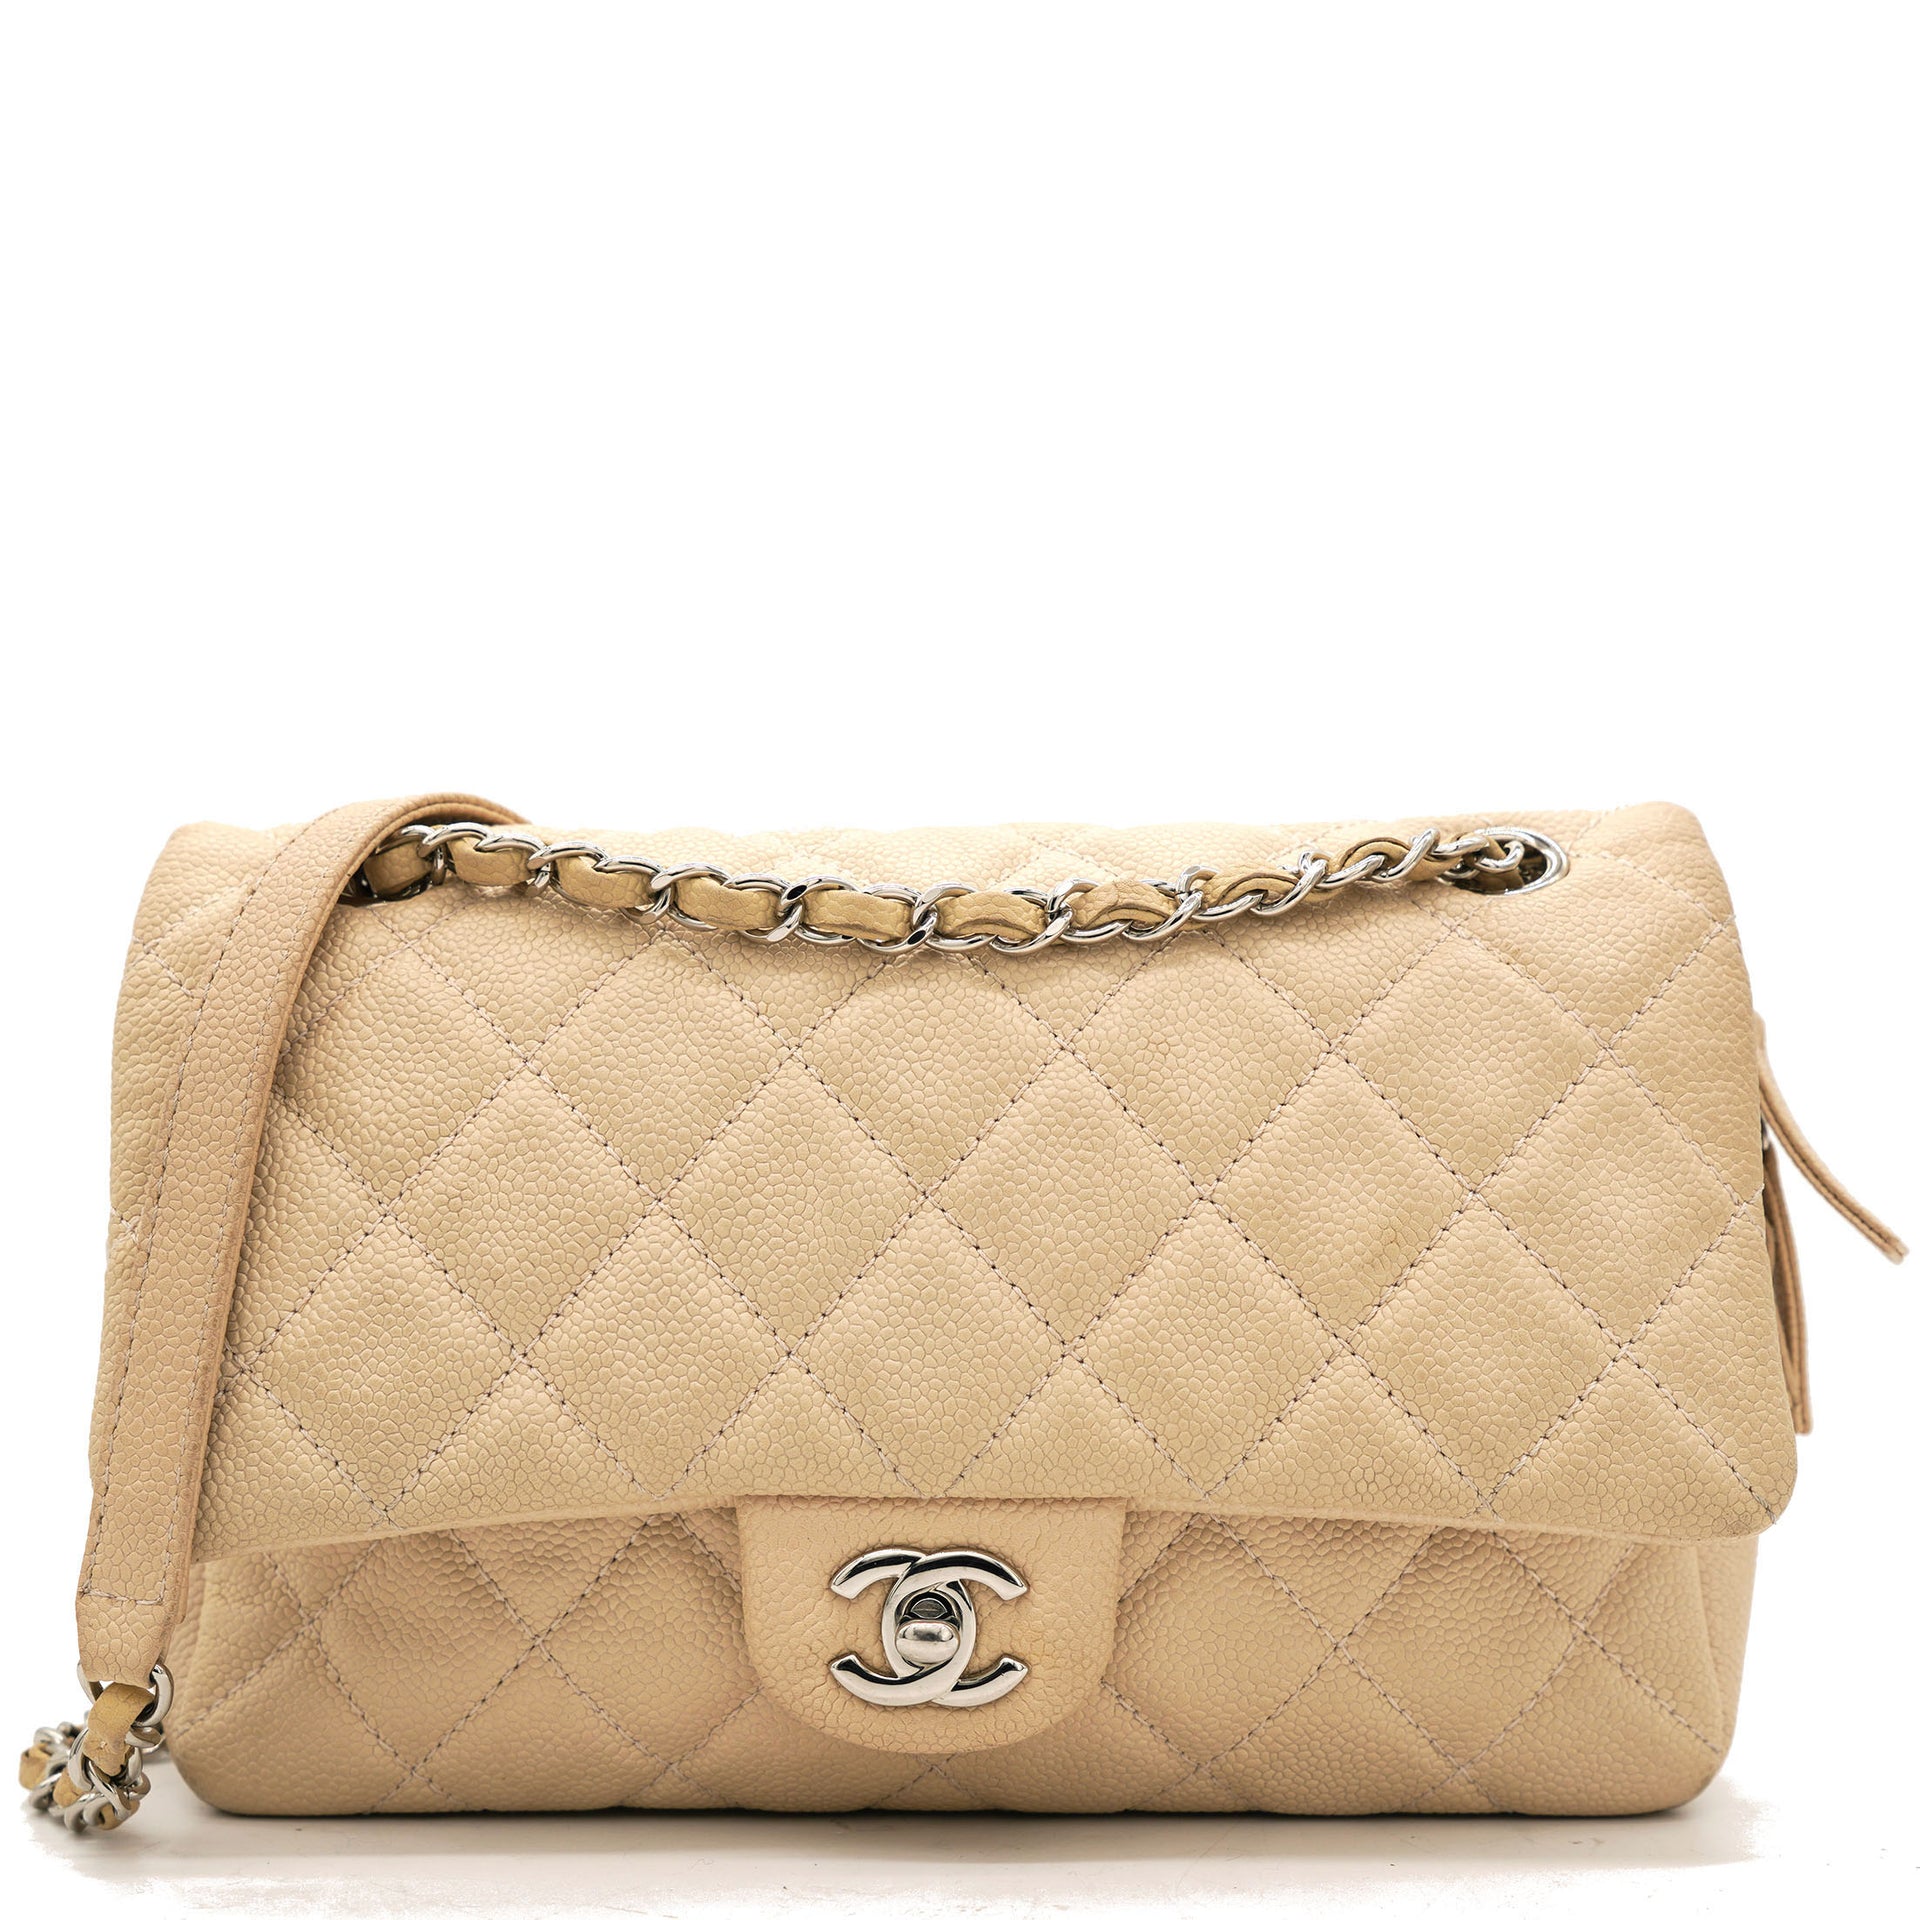 Chanel Black Quilted Calfskin Leather Small Easy Flap Bag